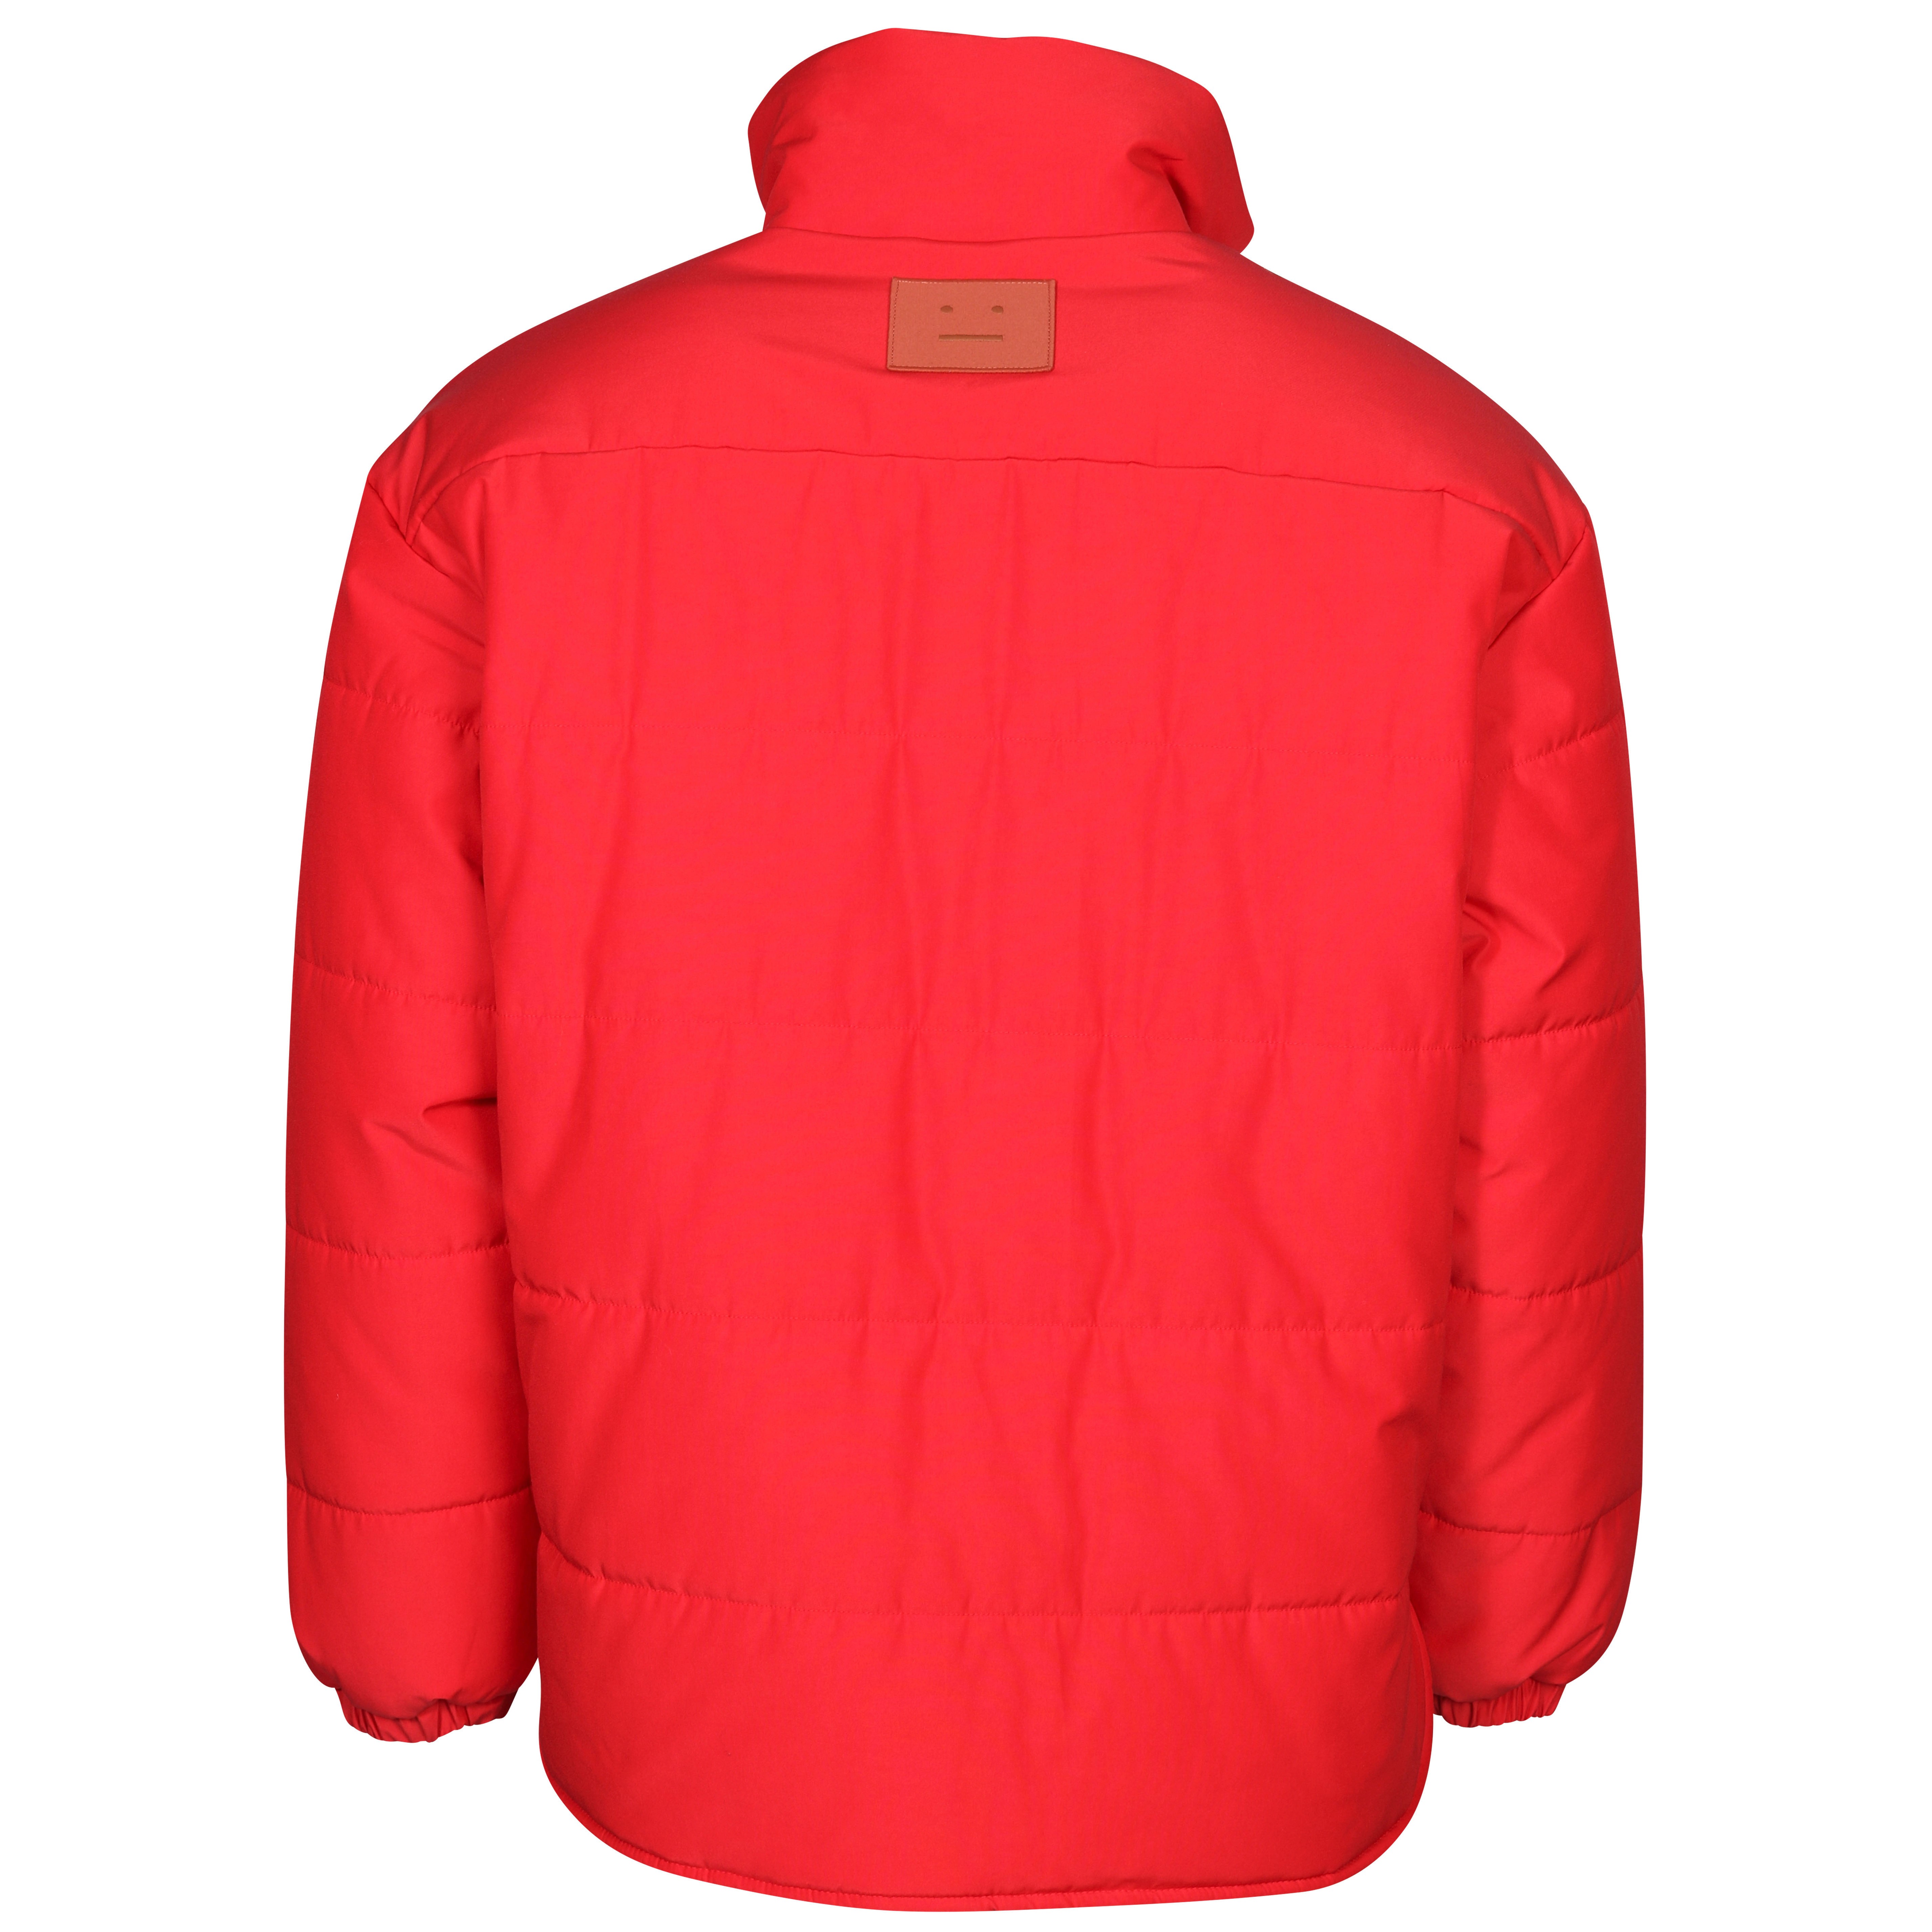 Acne Studios Padded Jacket in Red